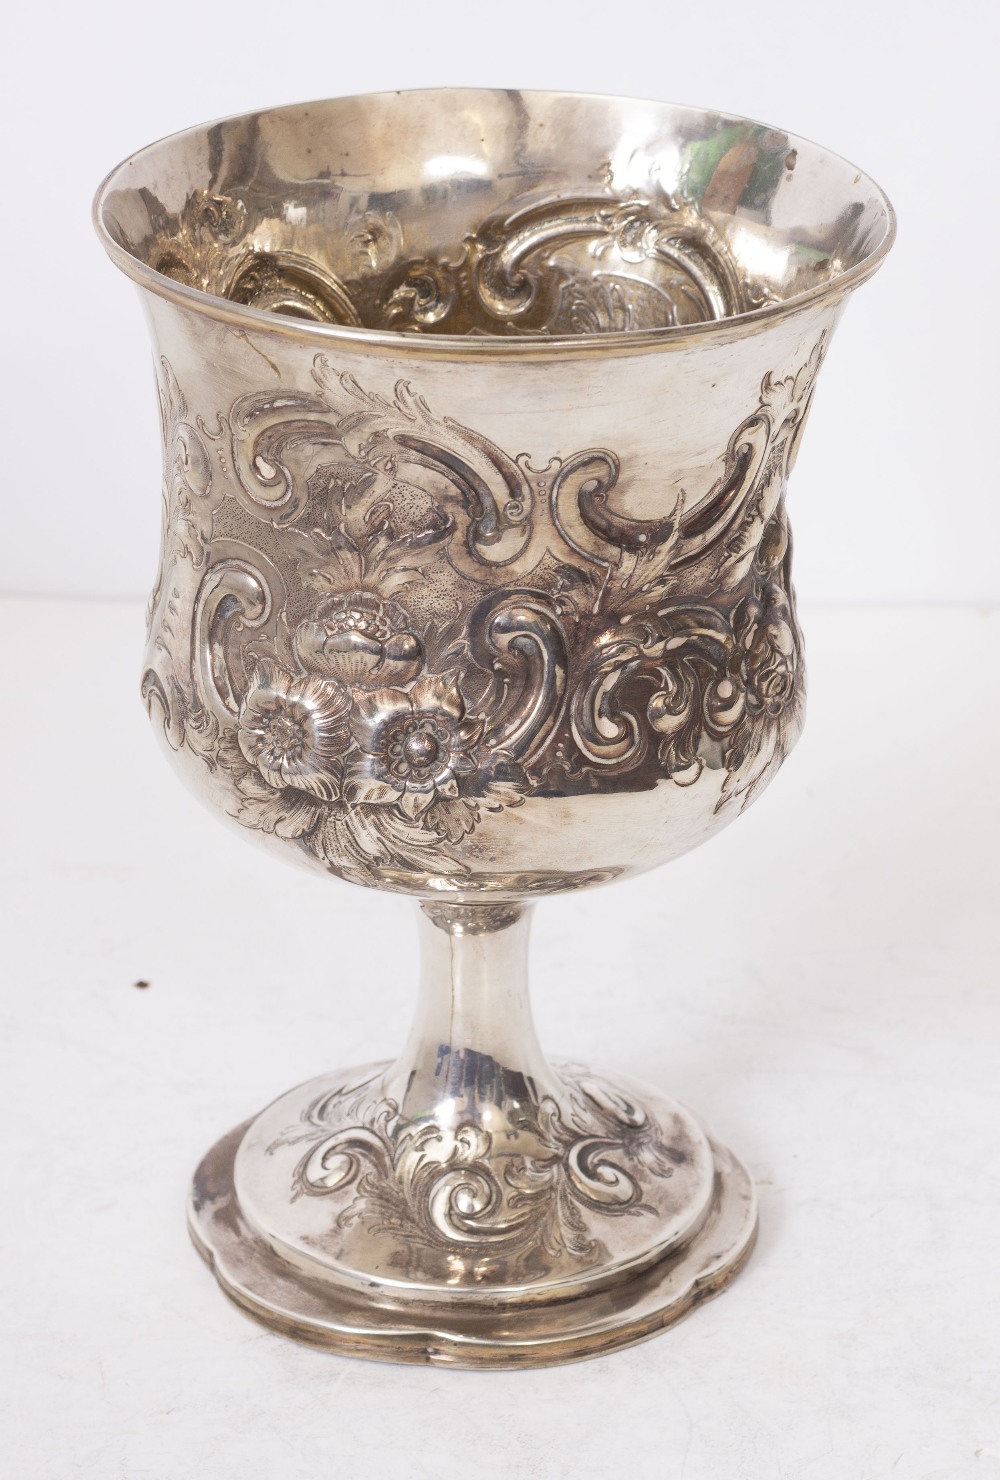 A LARGE GEORGIAN SILVER CUP with embossed / engraved floral cartouches and engraved with 'R A Drag - Image 8 of 8